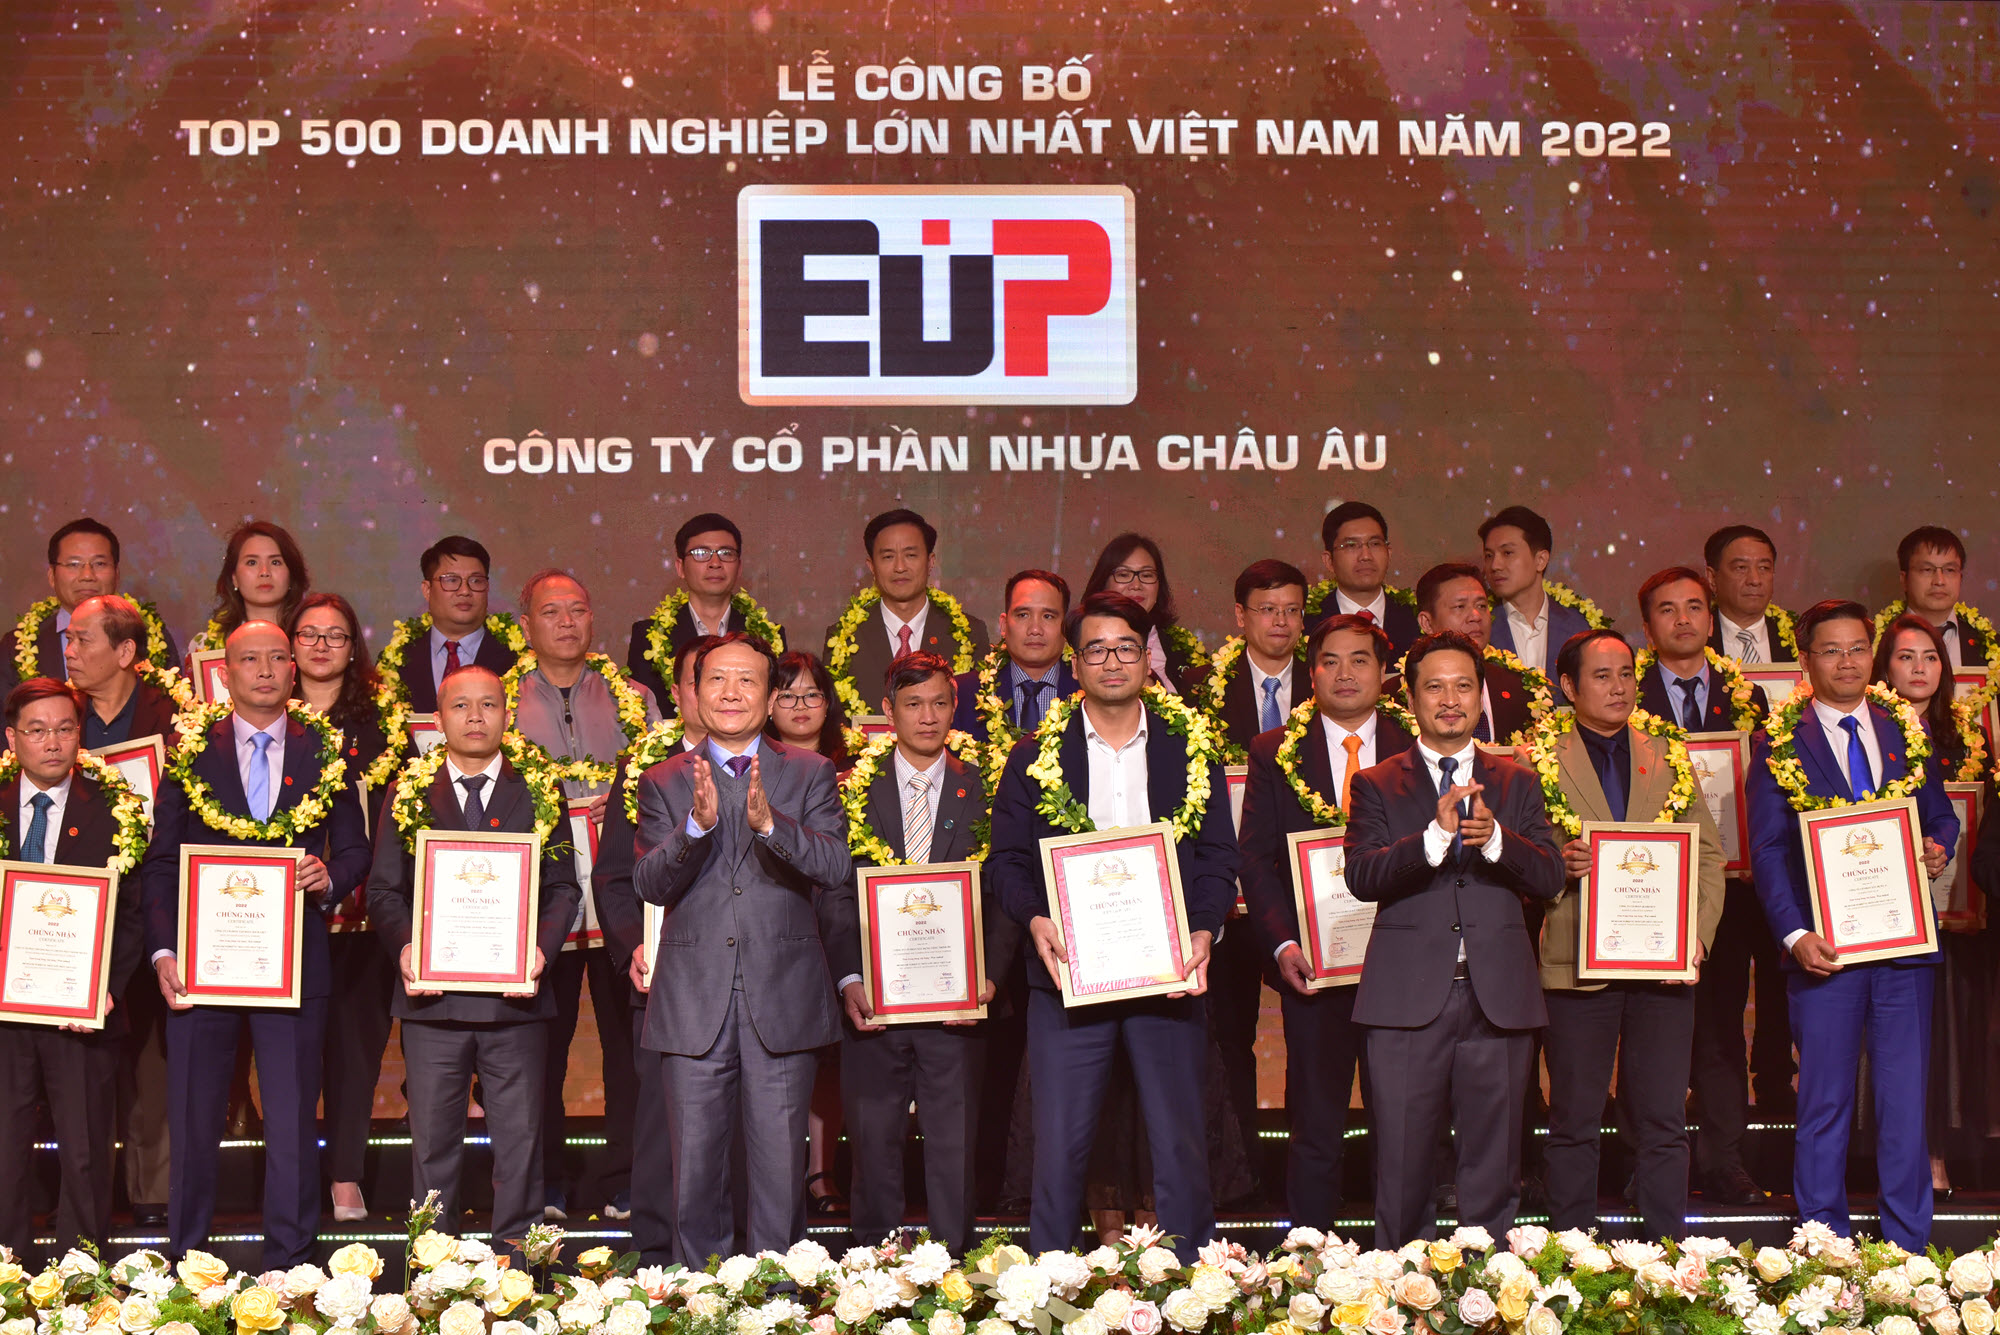 Continuing to increase rankings at VNR500 2022 - EuP maintains its position as the world's largest filler masterbatch manufacturer